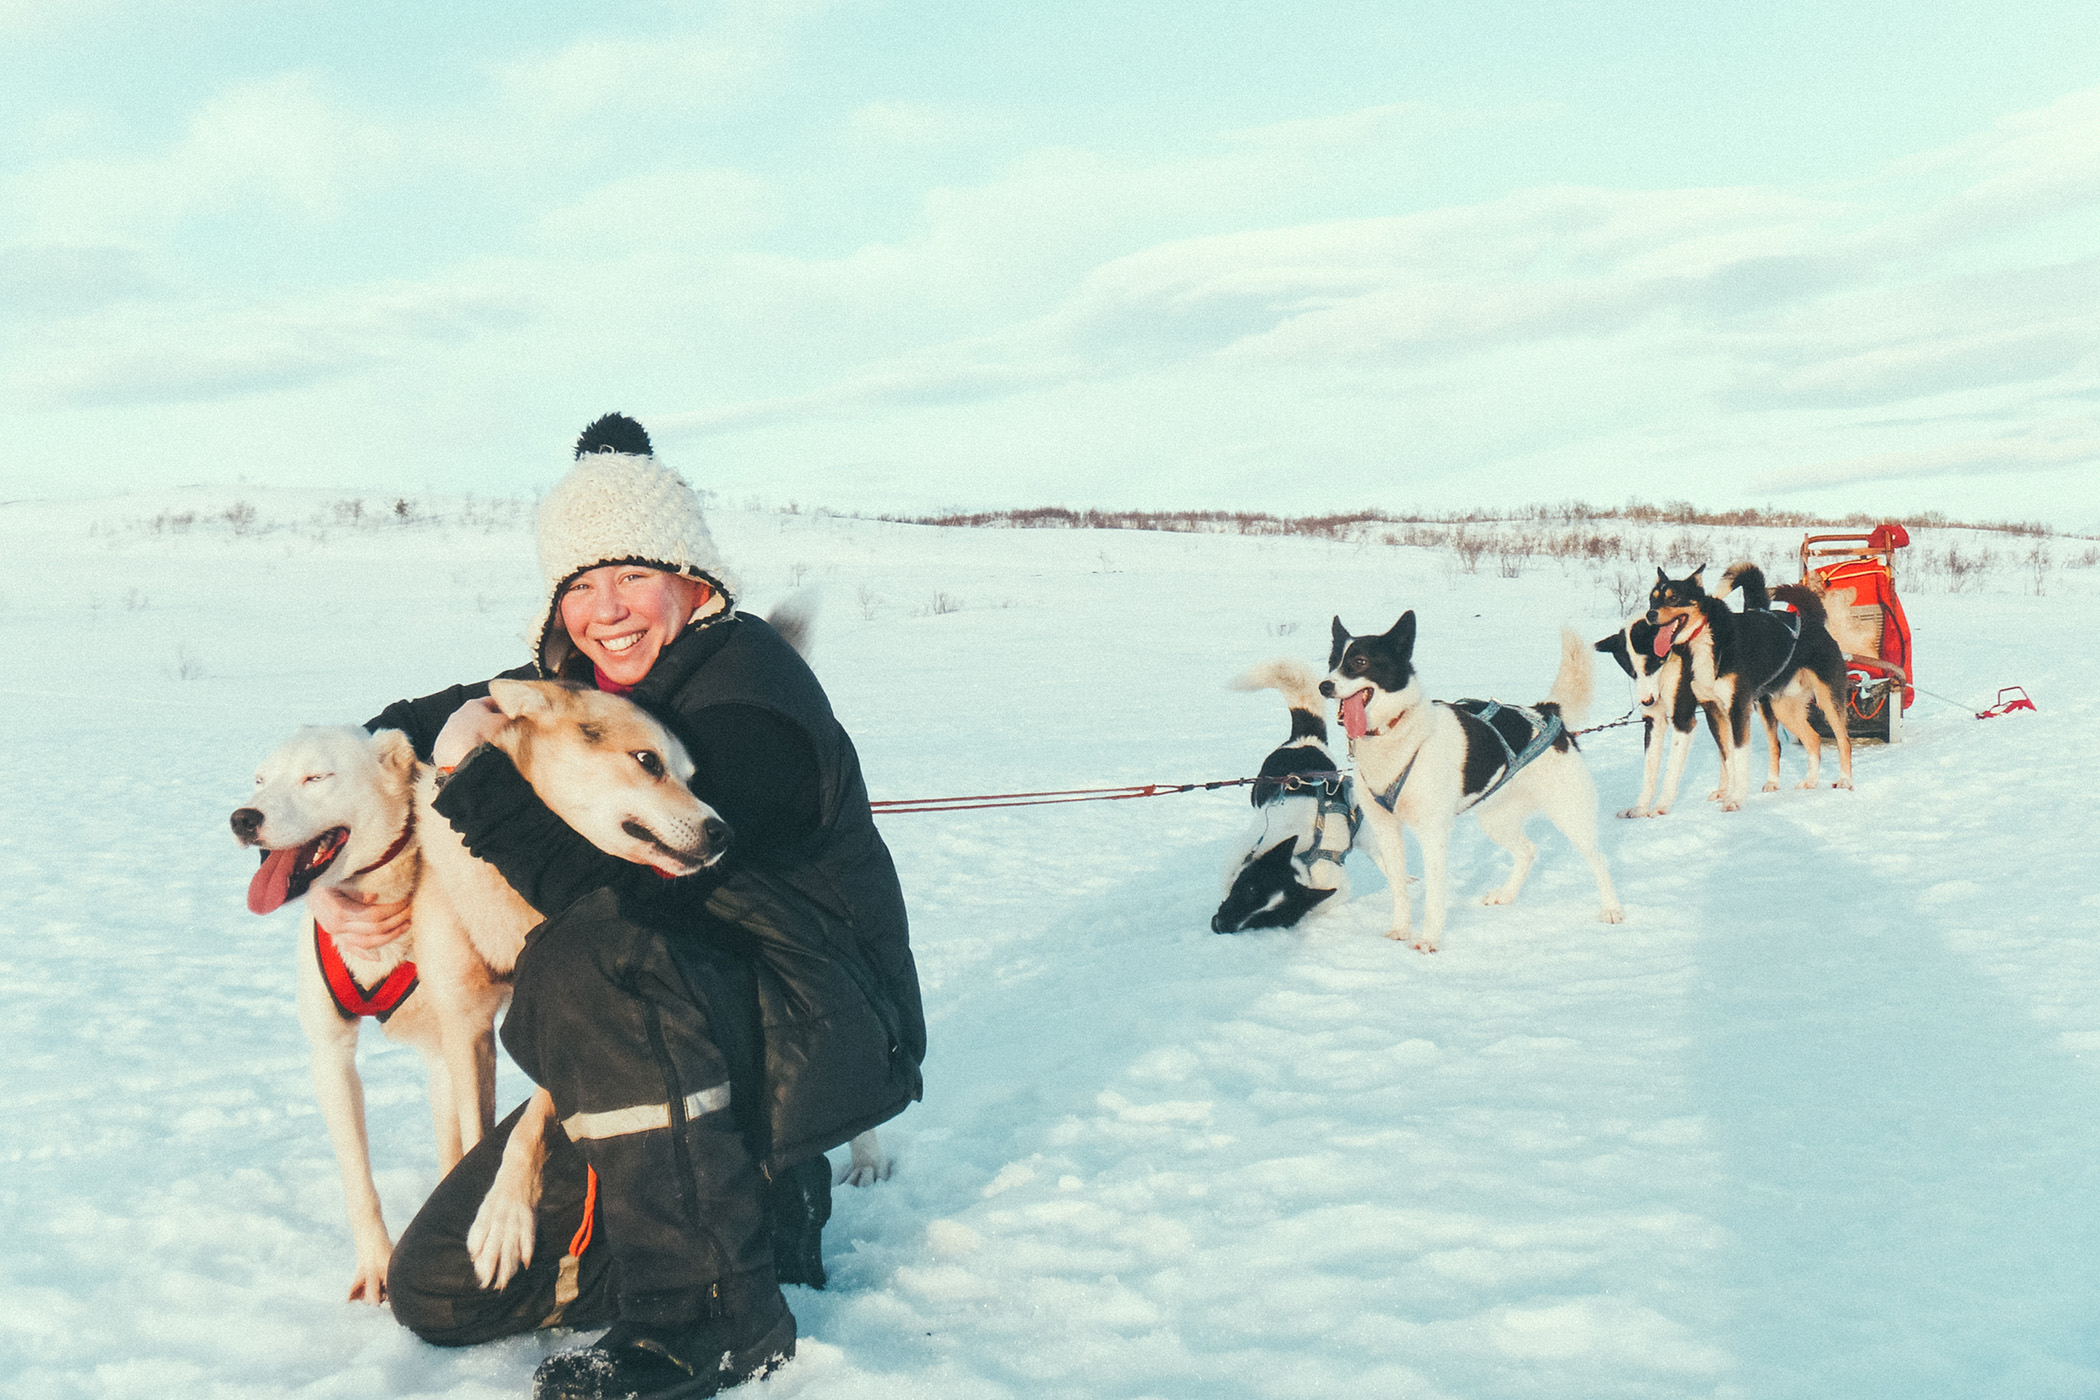 Dog sledding expedition in Norway